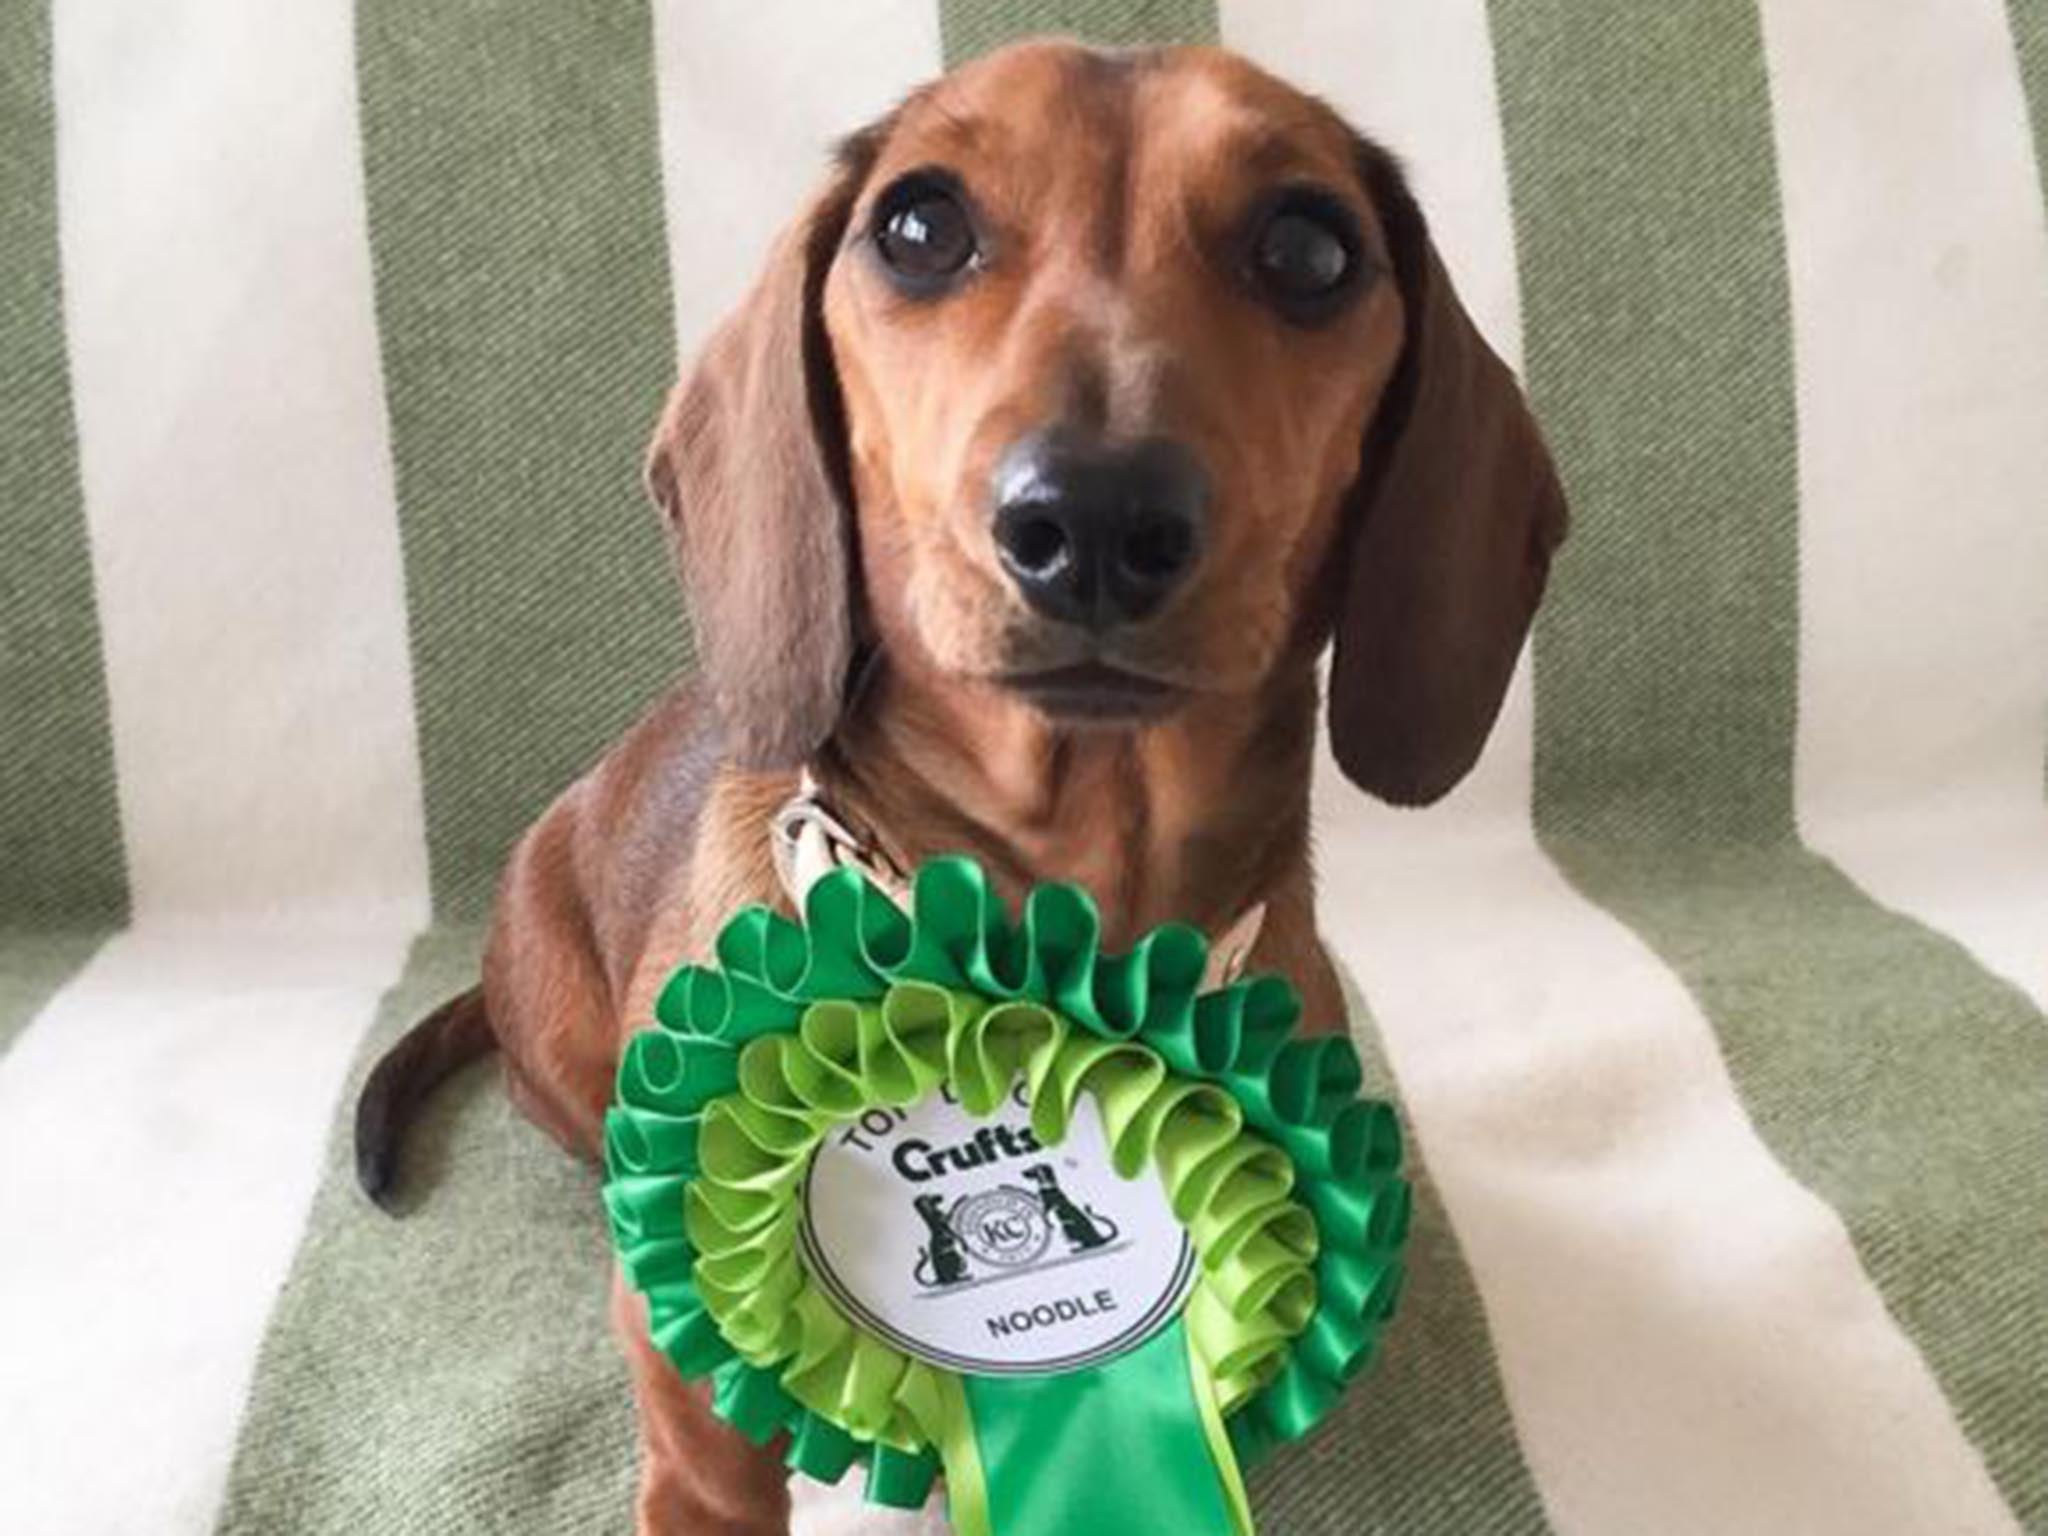 lindsay sanders the owner of a miniature dachshund with more than 66 000 instagram followers - get followers on instagram for dog